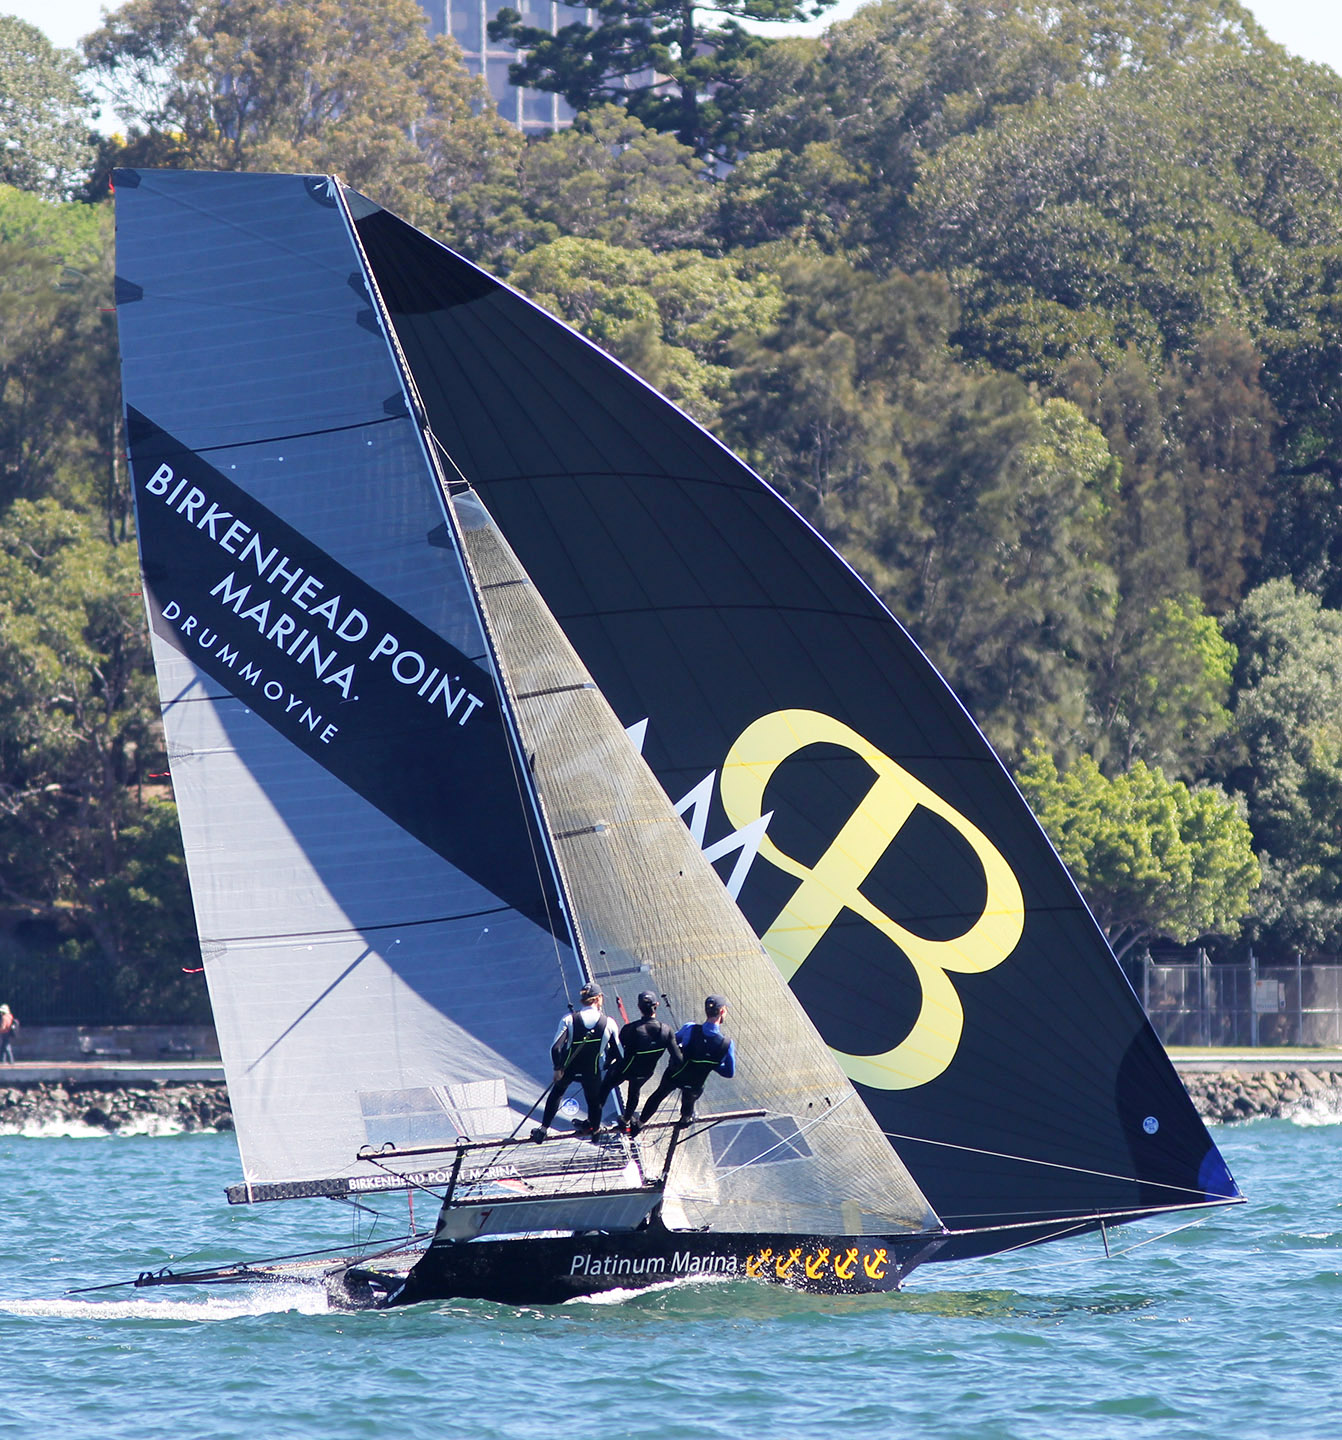  18 Footer  Spring Series 2019  Sydney AUS  Race 2  another win for Noakesailing